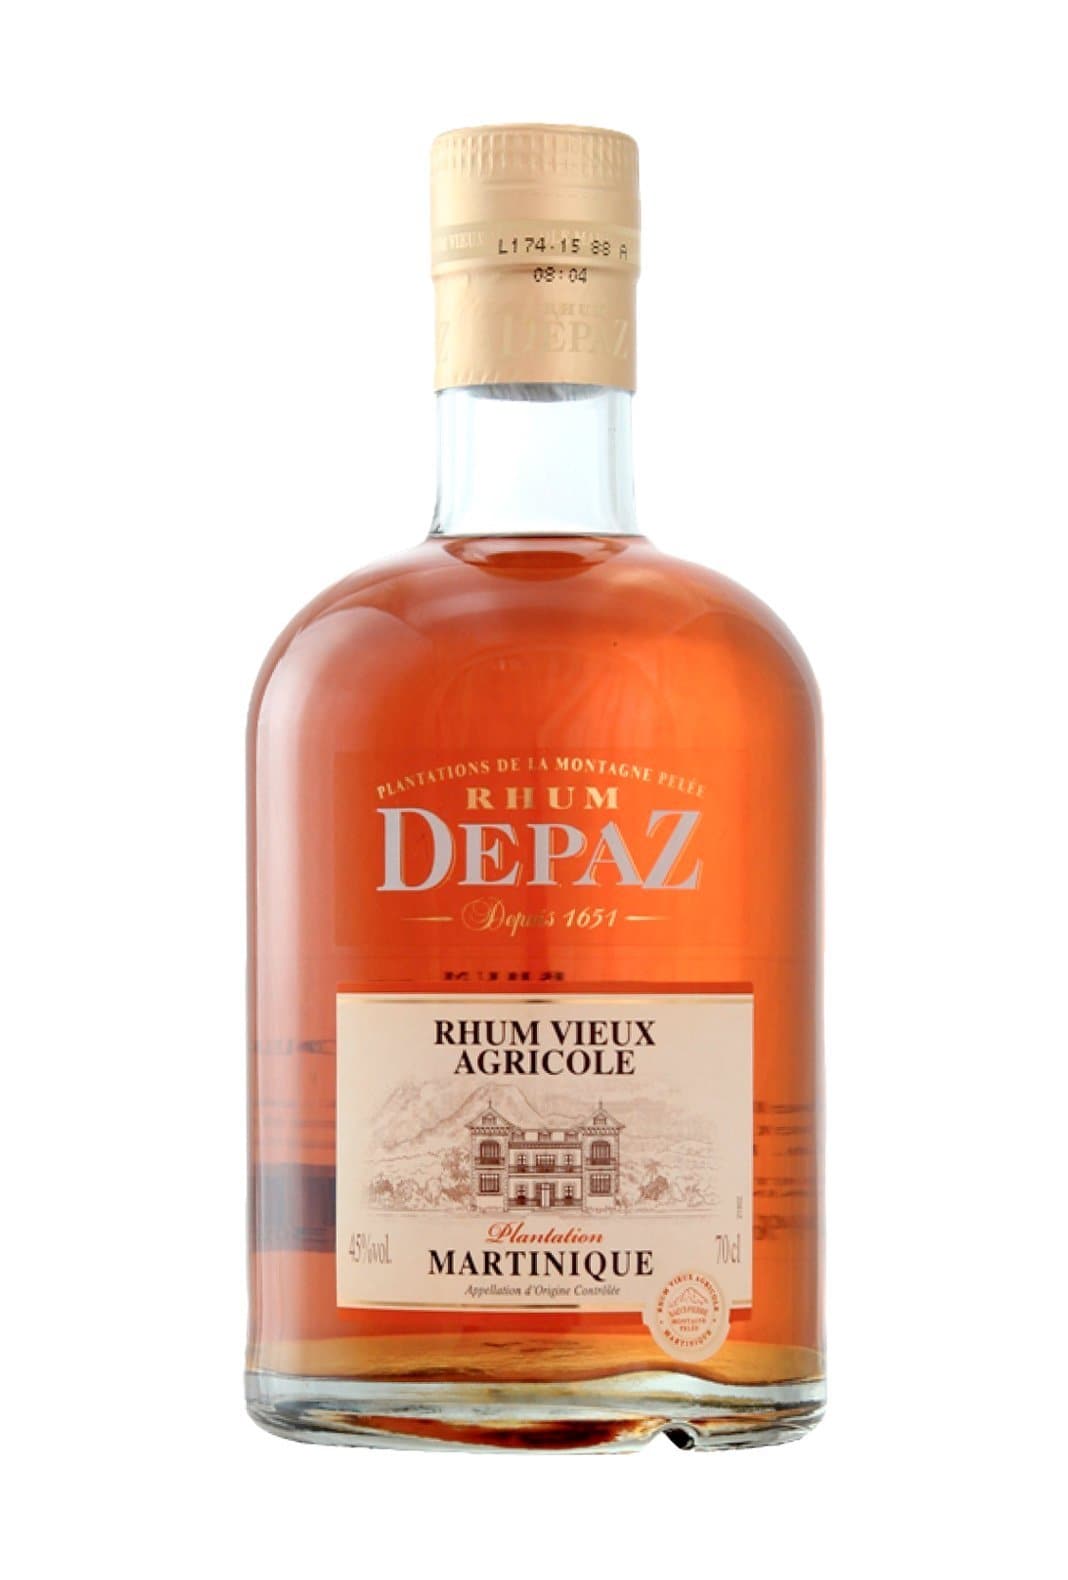 Depaz Rum Agricole Vieux (Old) Martinique 3 years 45% 700ml | Rum | Shop online at Spirits of France